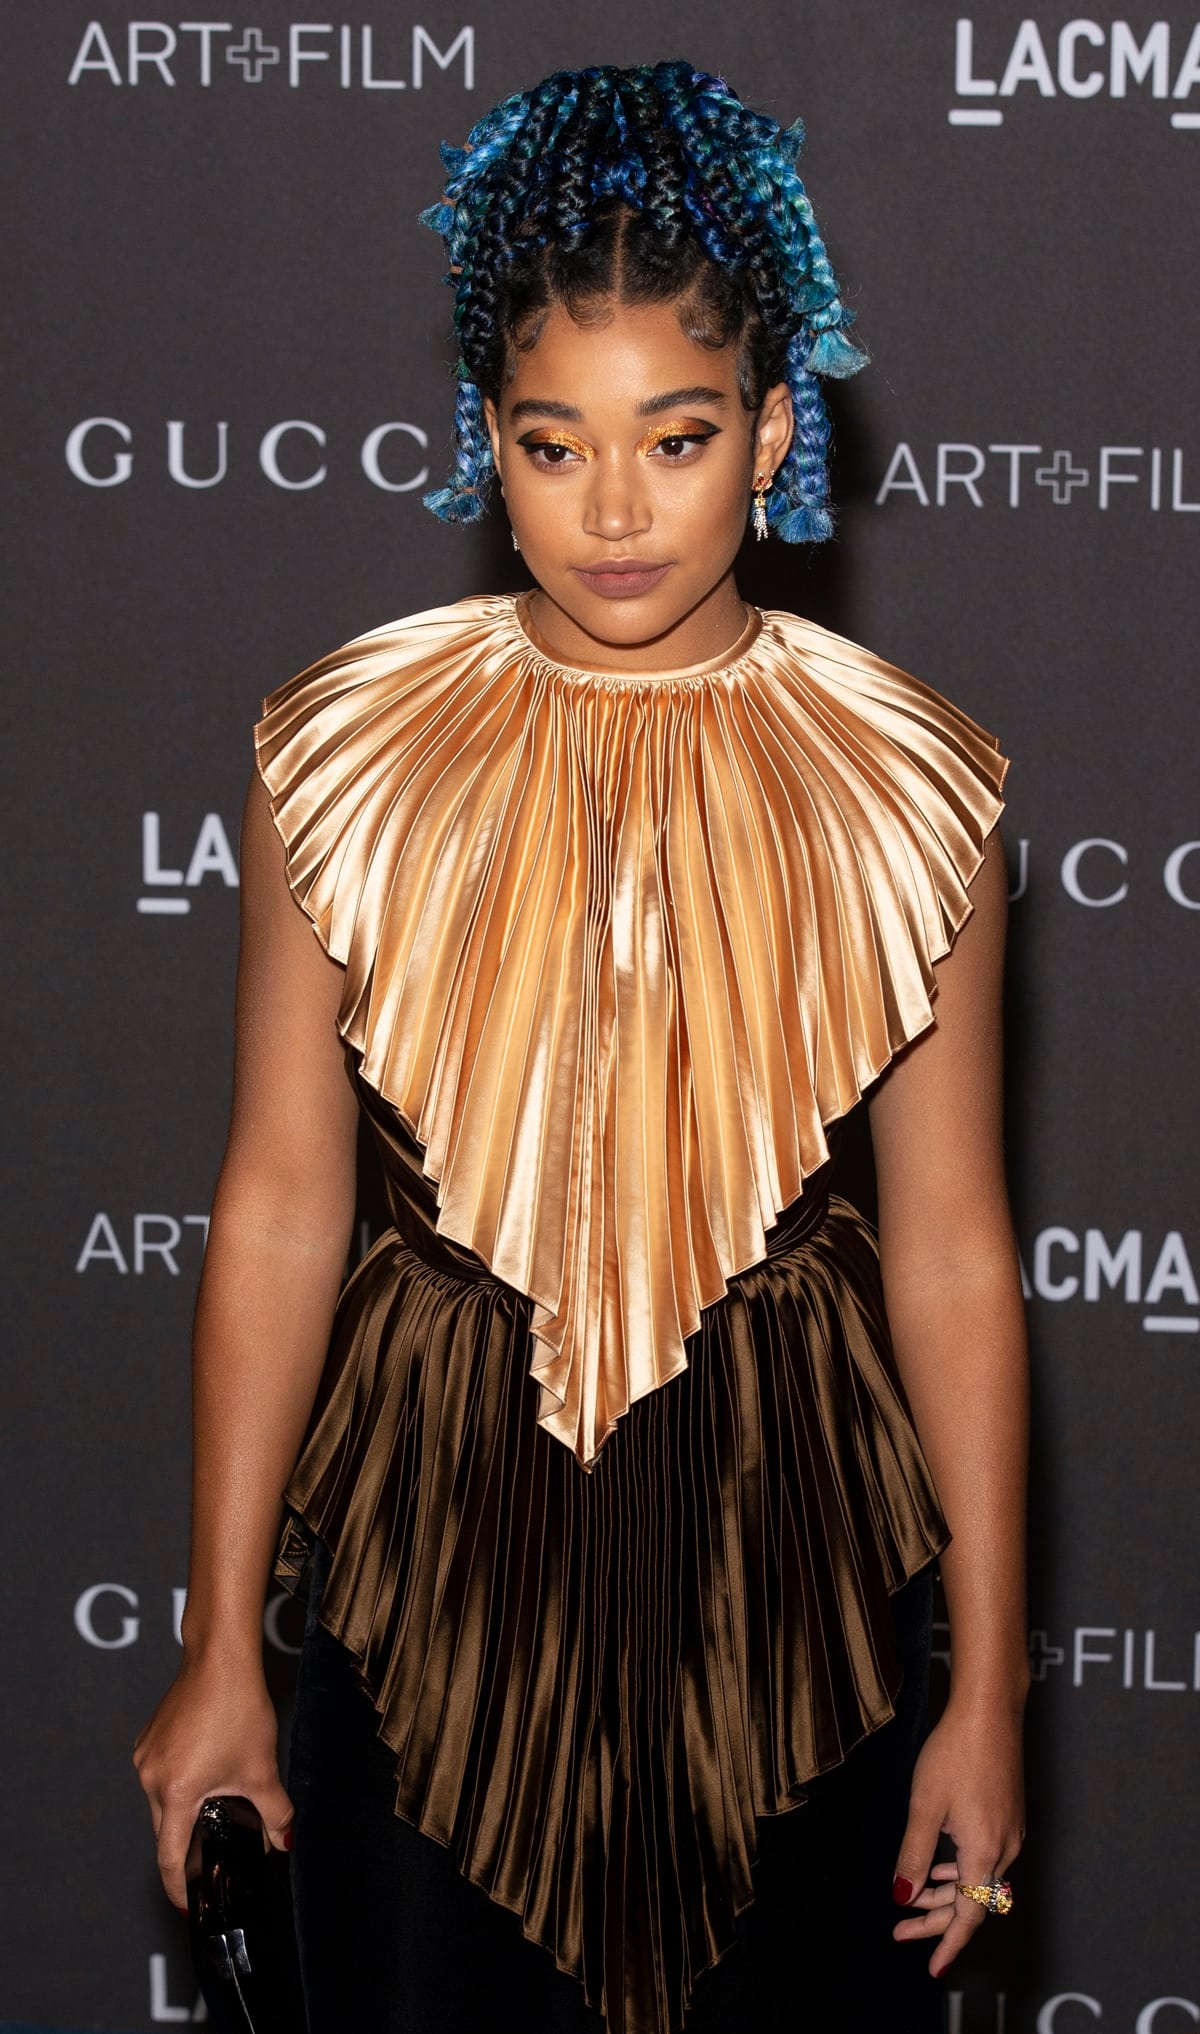 Amandla Stenberg has signed on to star in Universal's planned remake of the 1996 thriller Fear